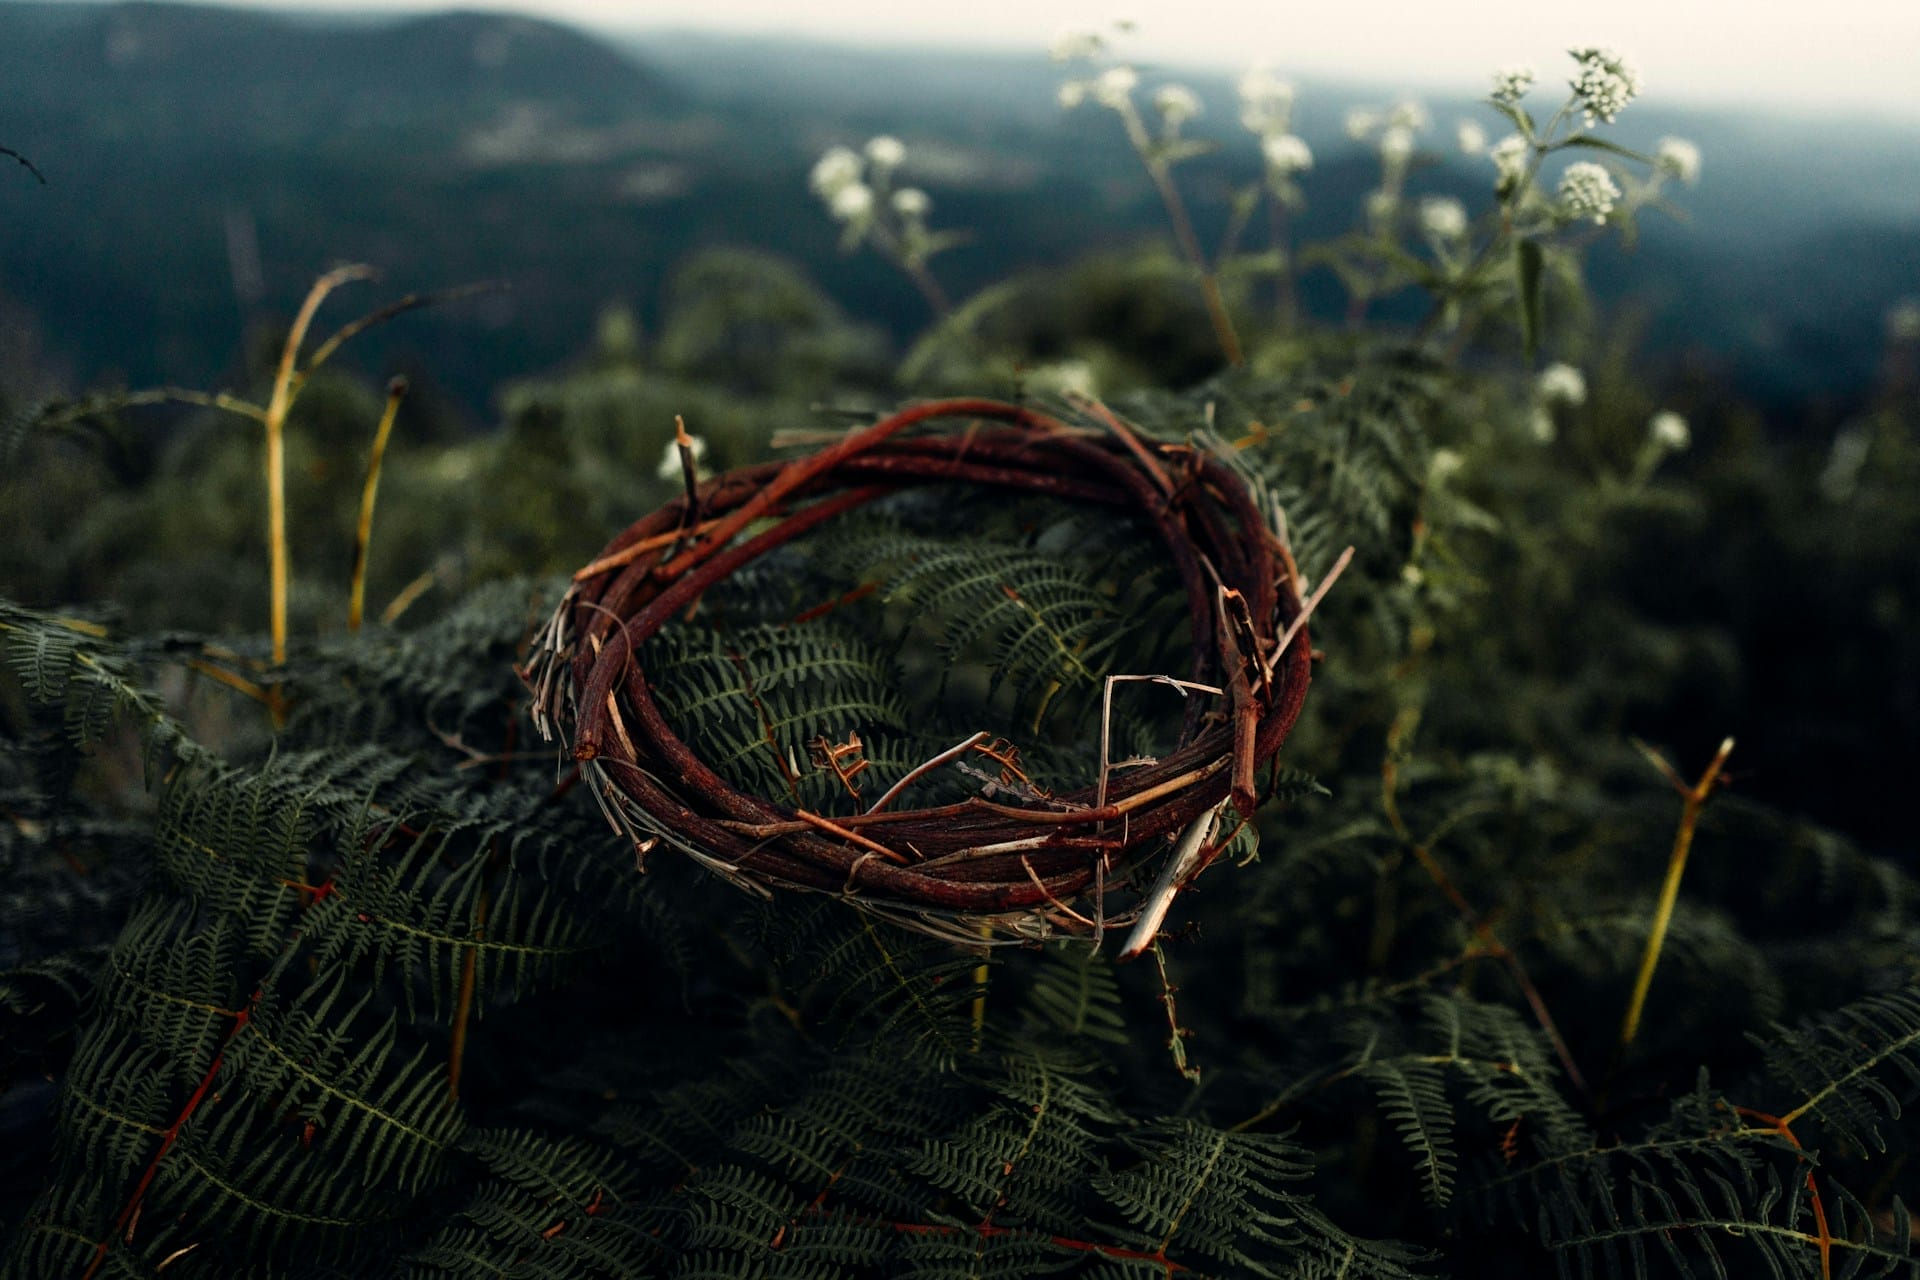 The story of Easter is re-told in this creative video by Willow Creek